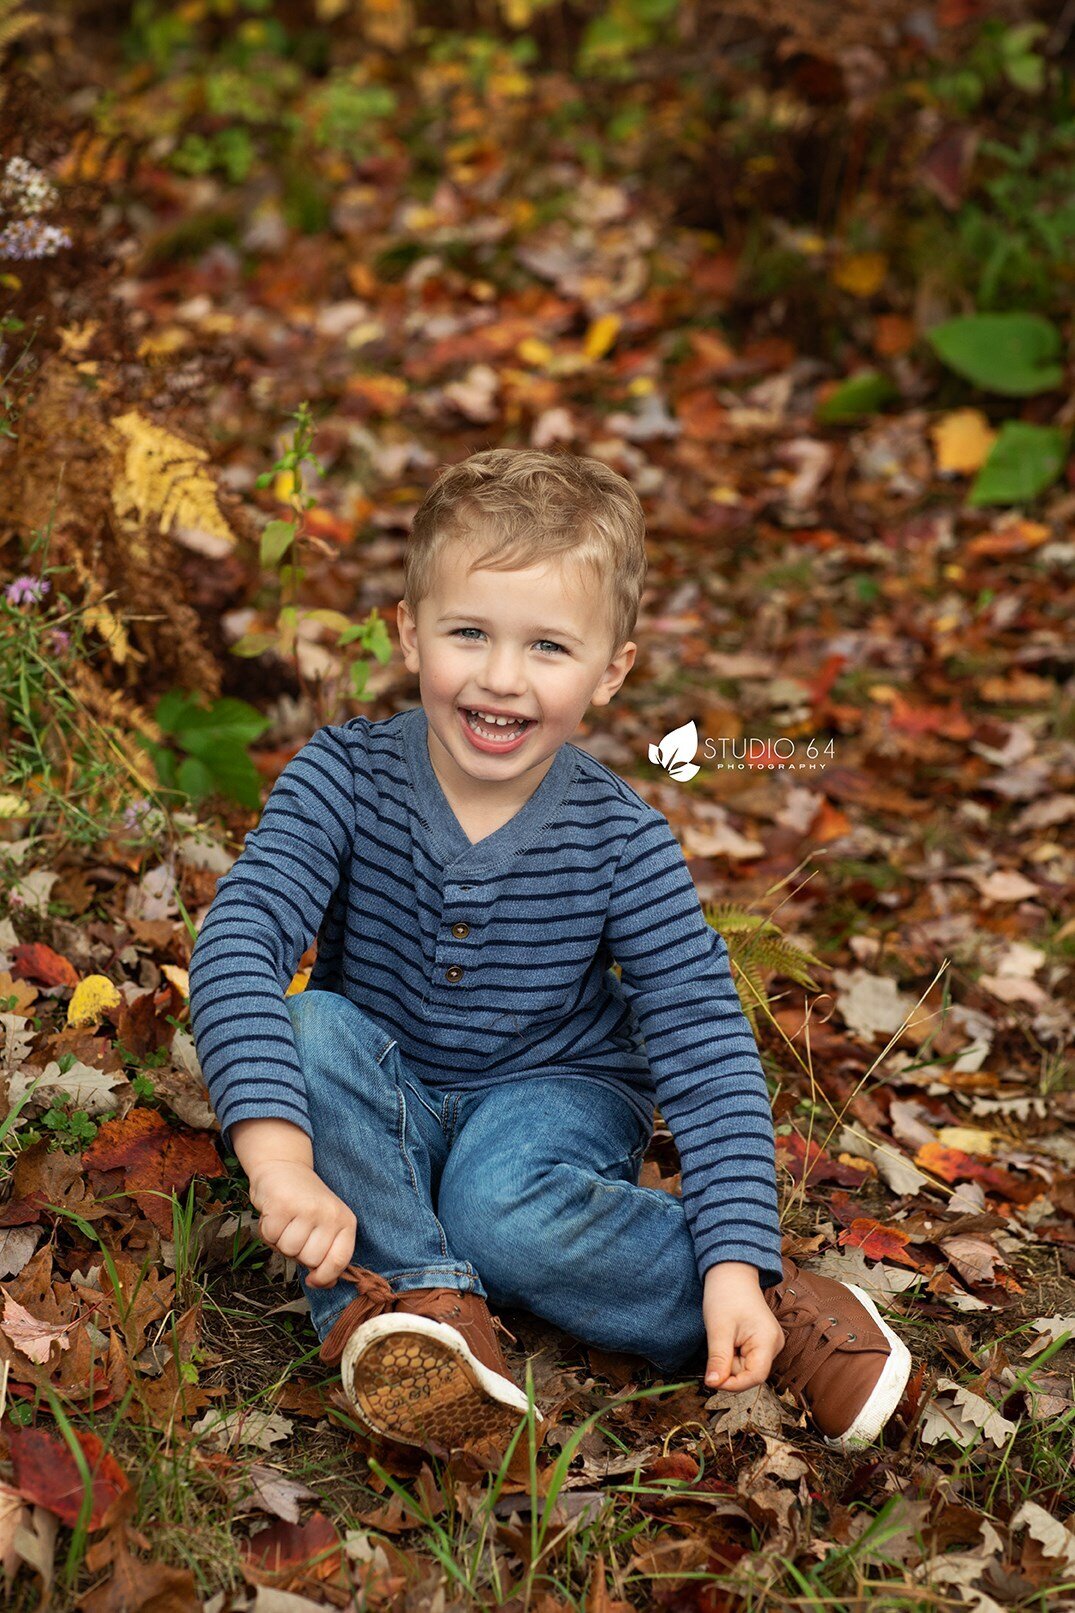 A five year old boy sitting on a ground full of leaves being silly and smiling.